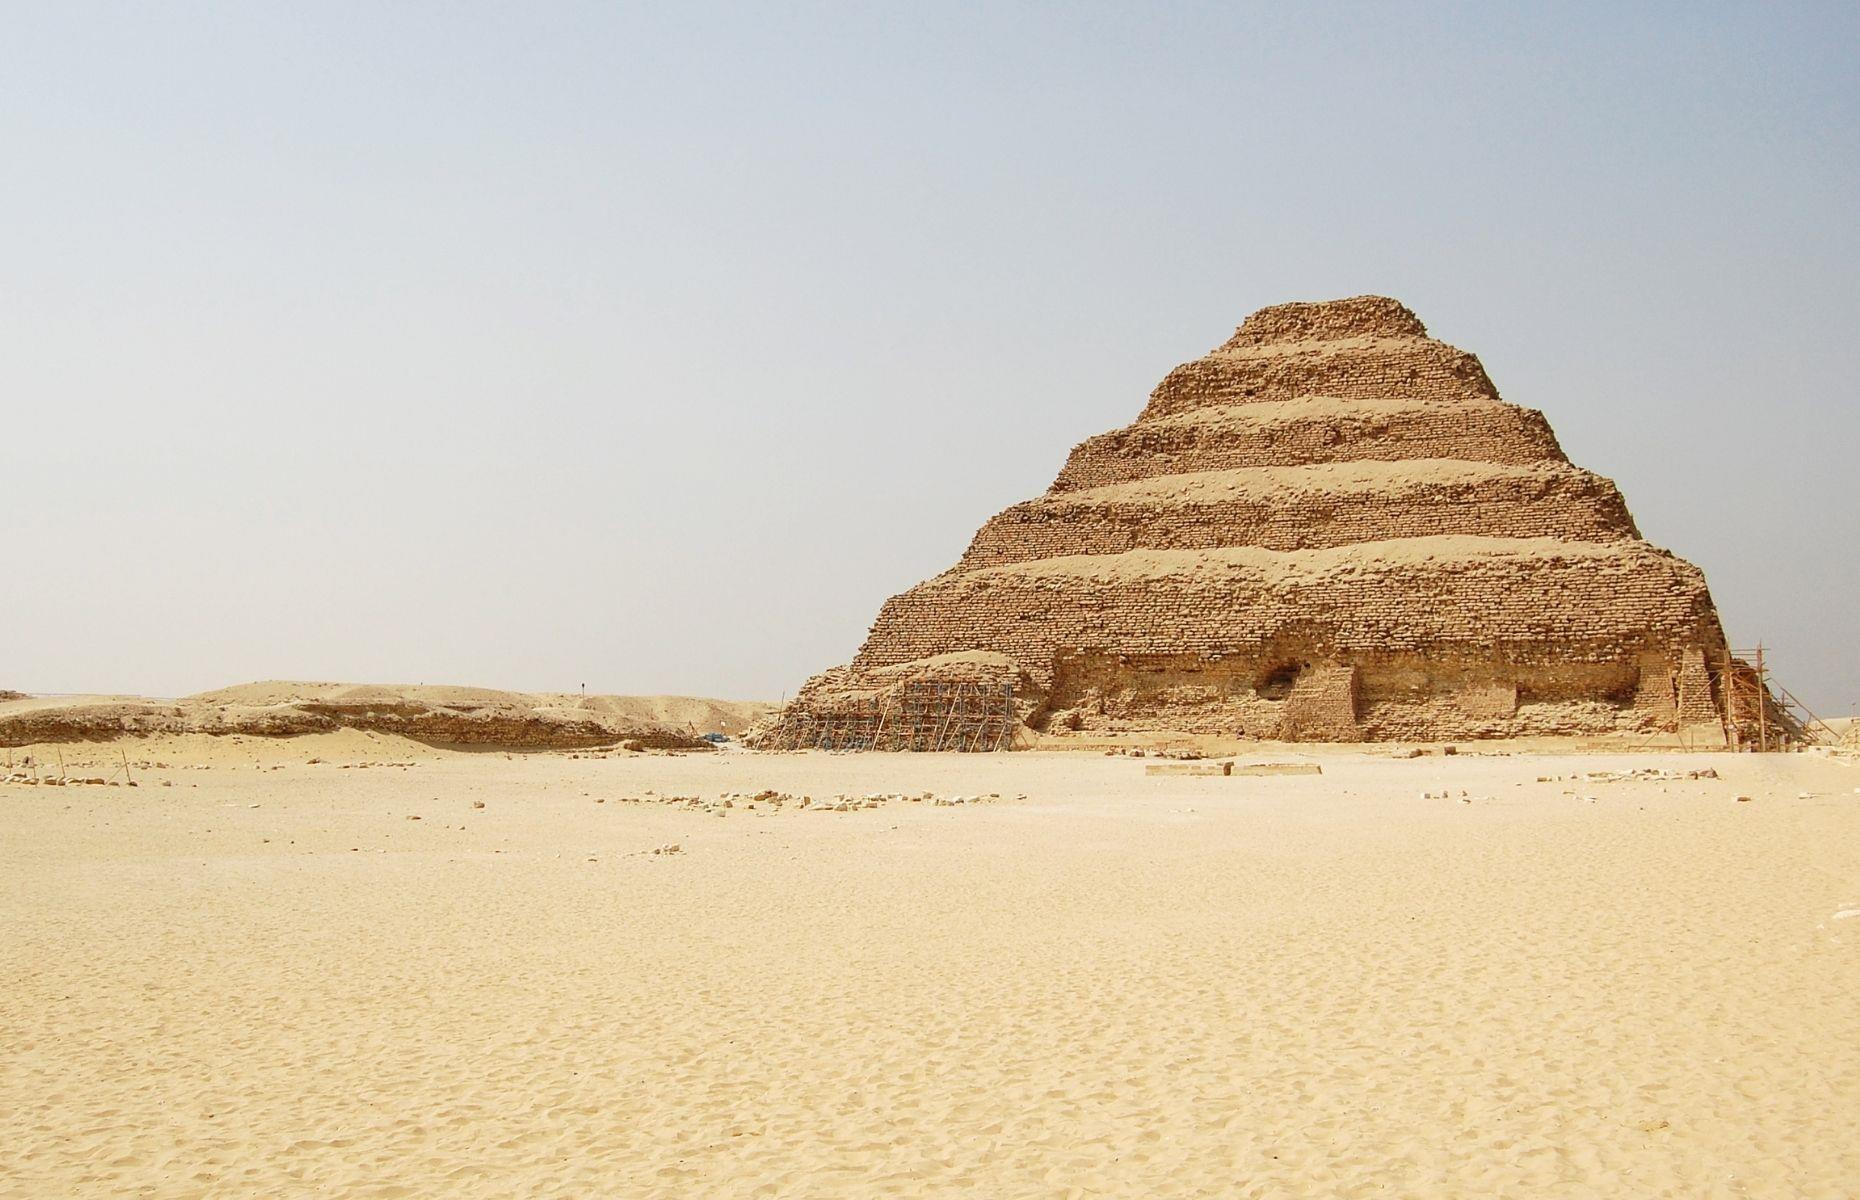 <p>Possibly Egypt’s strangest-looking pyramid is the Djoser Pyramid, located in Saqqara, in the ancient capital of Memphis. Djoser (2650 to 2575 BC) was the first king to use stone in a pyramid’s construction; before this, they were simple rectangular monuments made from clay bricks. Its formation is the work of the architect Imhotep, who ‘stacked’ the rectangle-shaped matabas (a rectangular Egyptian tomb) to create this step pyramid. It was the first of its kind, with its tier-like appearance and materials used, and stands at 204 feet (62m) high.</p>